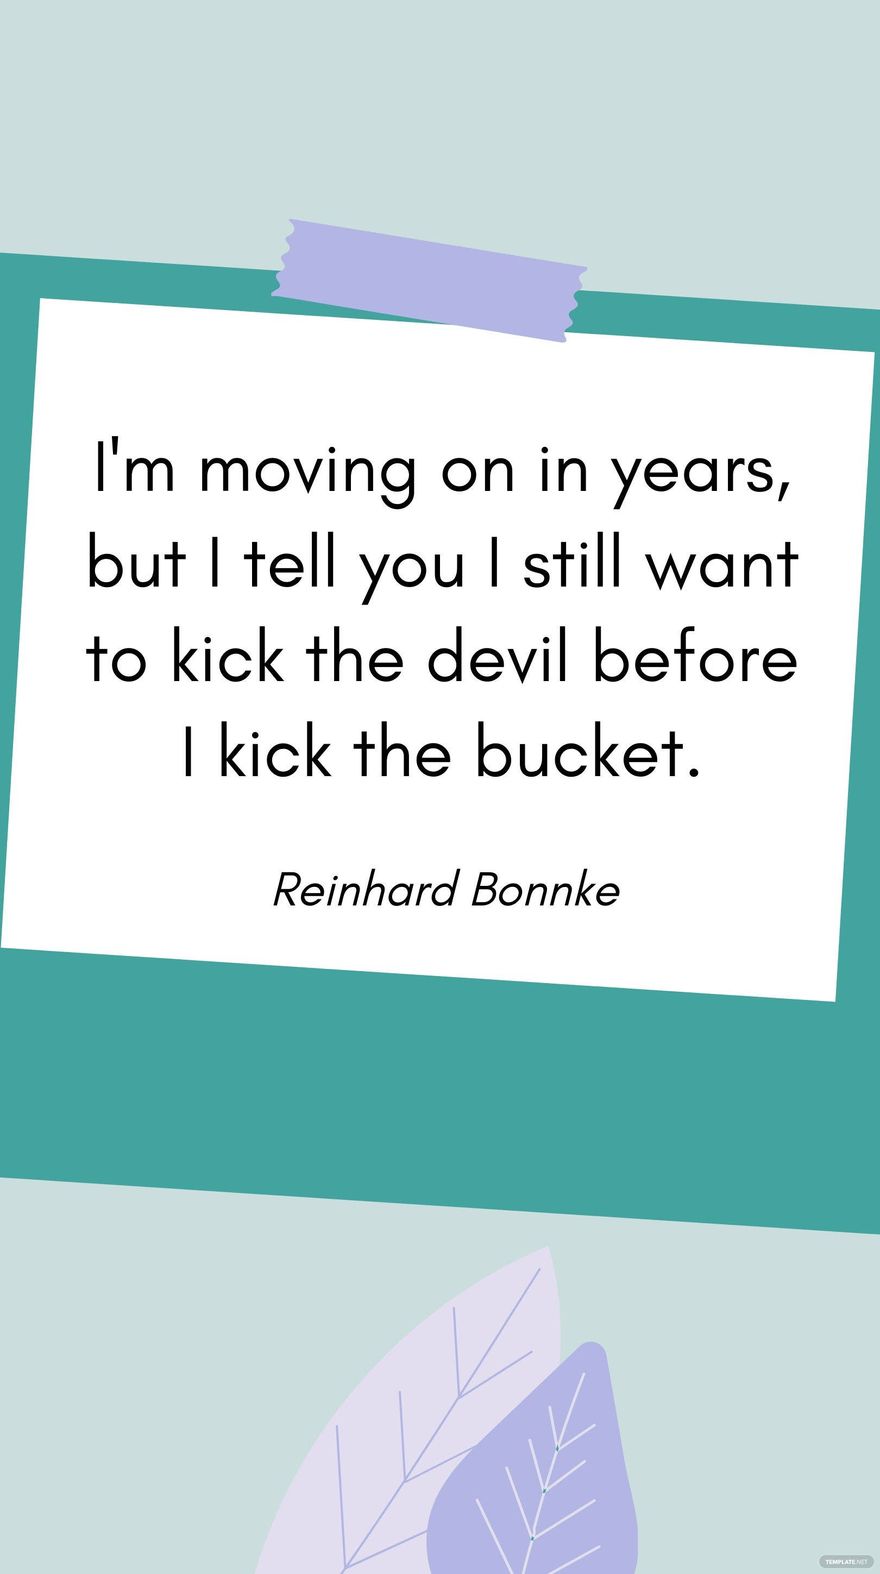 Free Reinhard Bonnke -I'm moving on in years, but I tell you I still want to kick the devil before I kick the bucket.